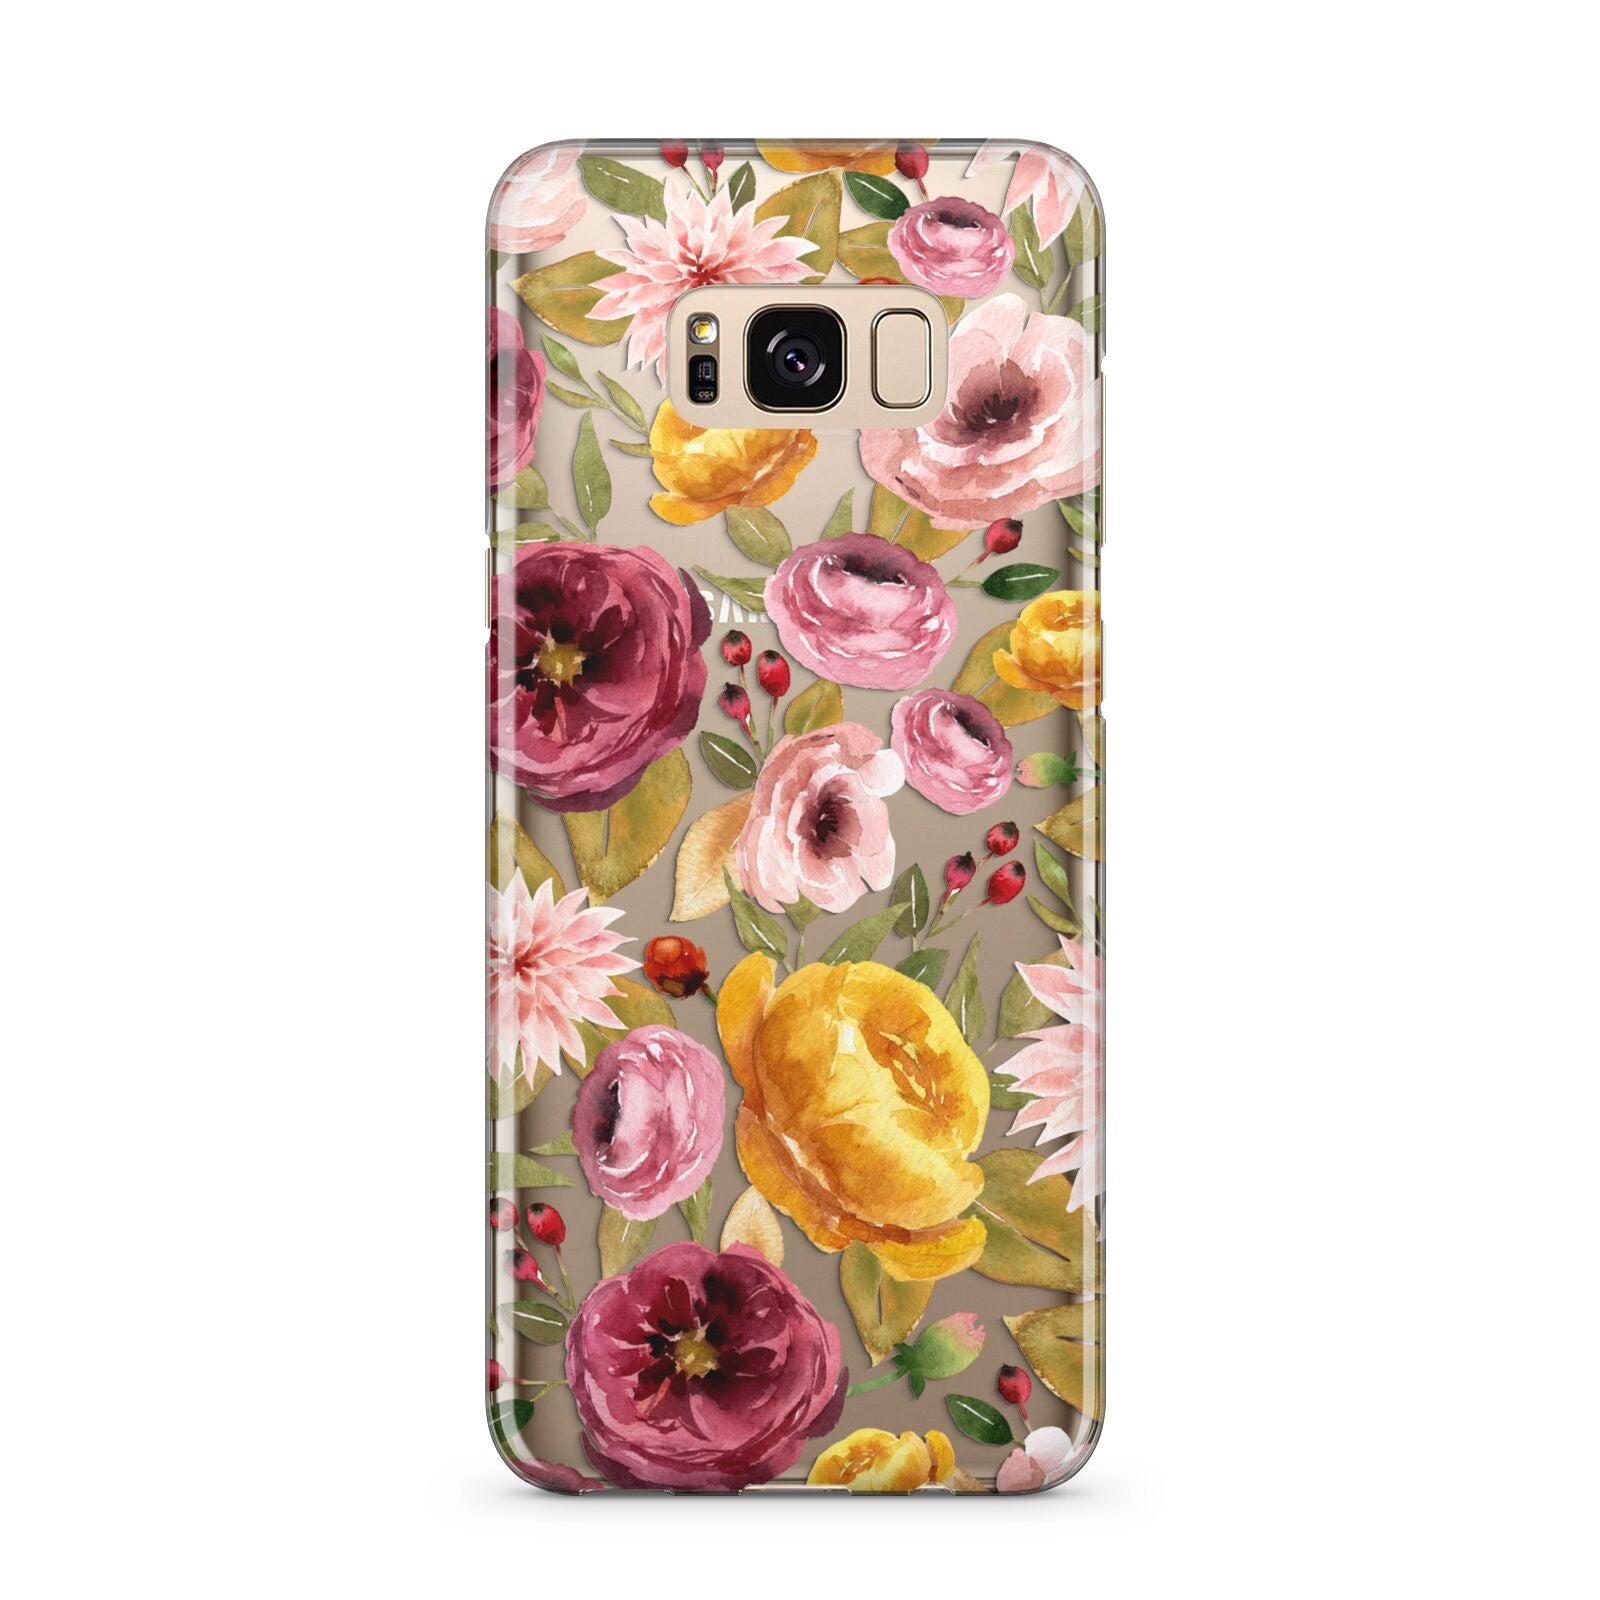 Pink and Mustard Floral Samsung Galaxy S8 Plus Case